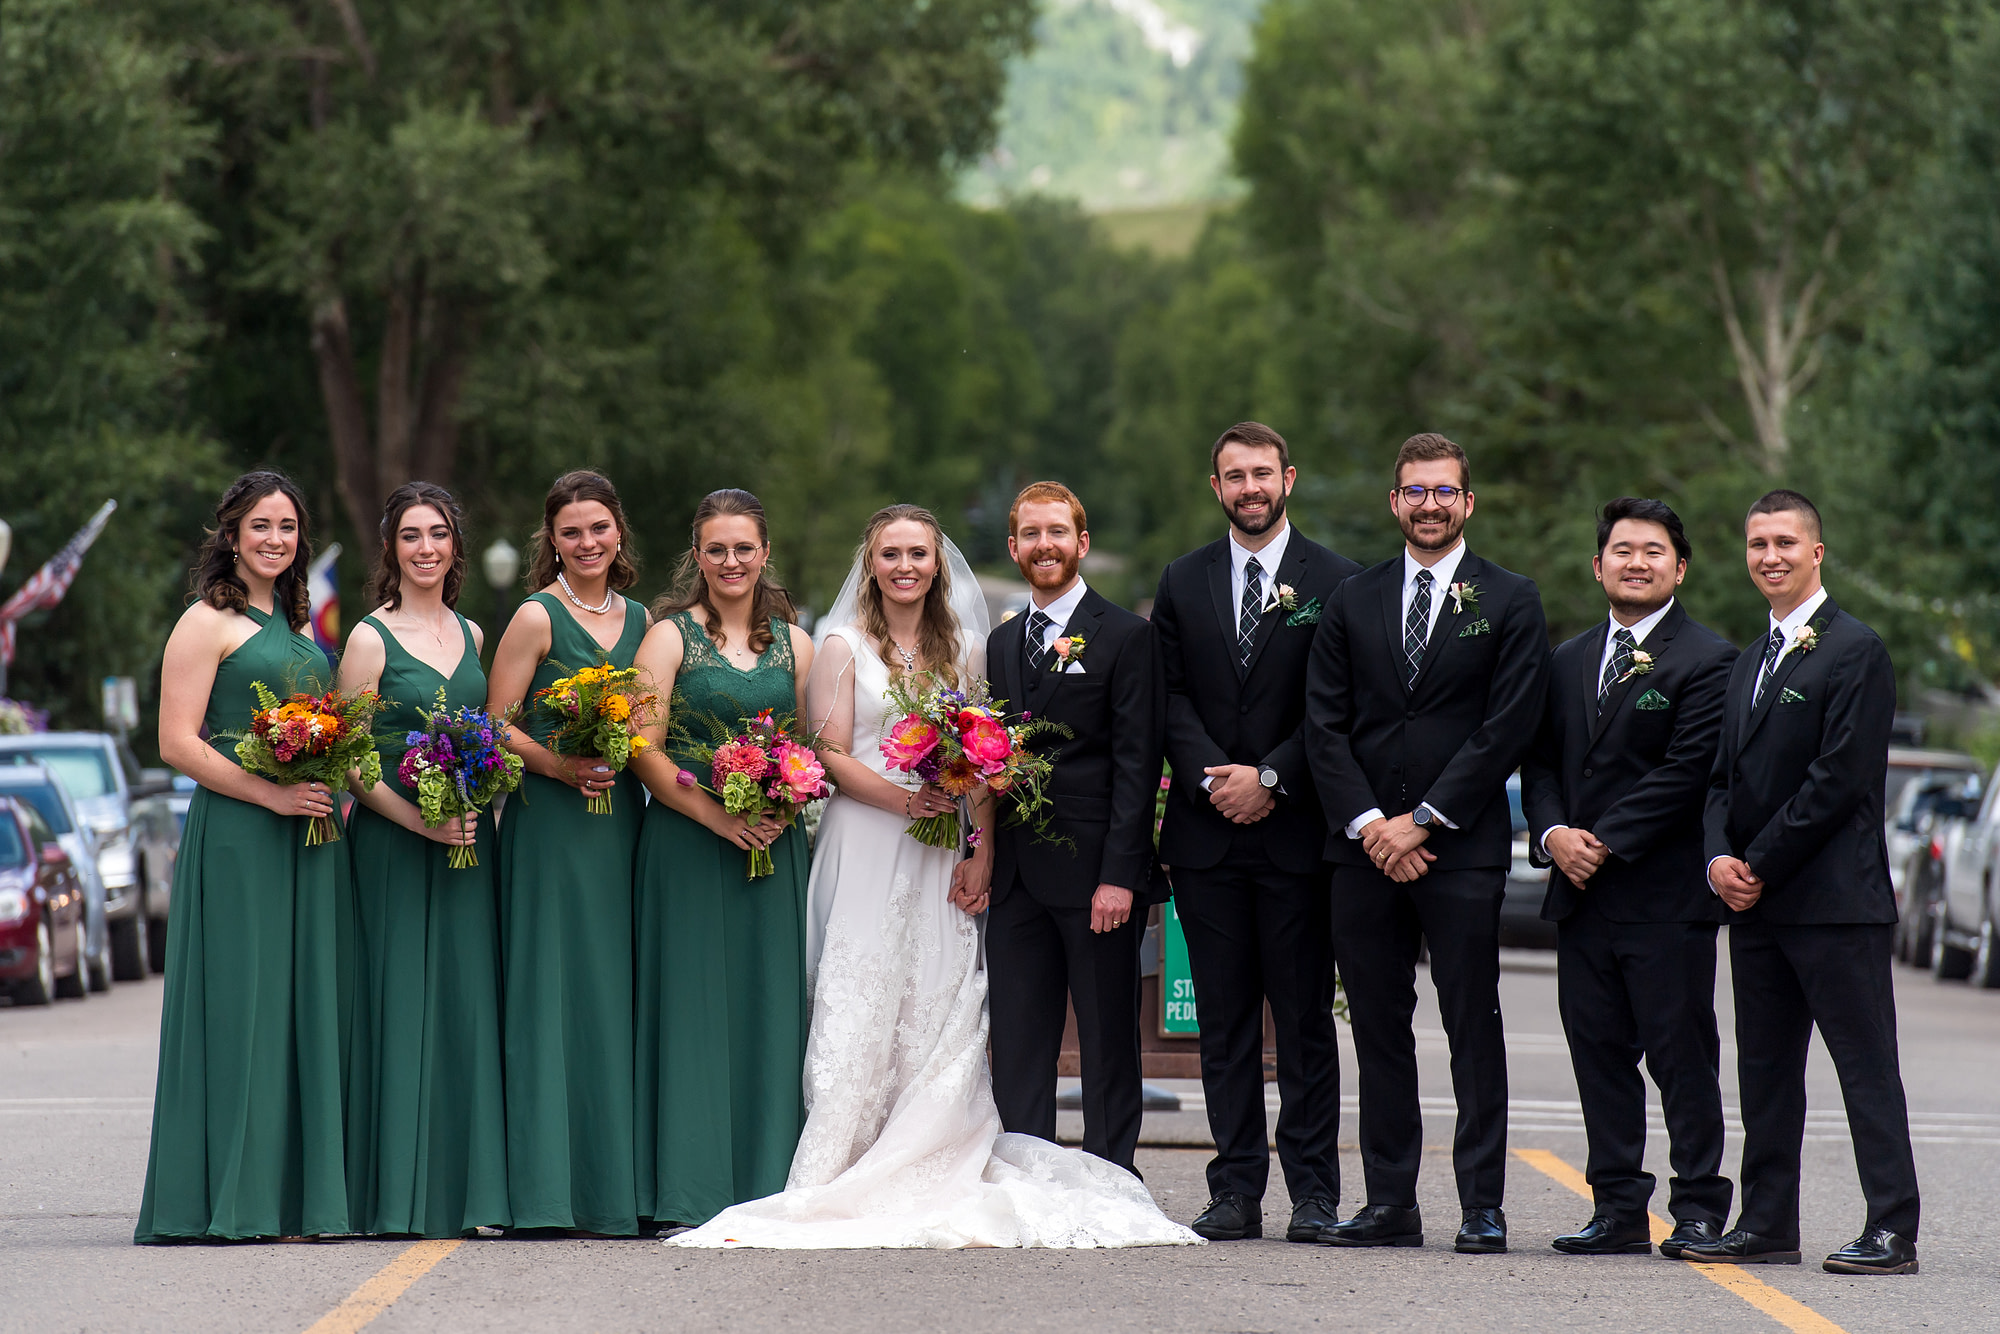 The bride, groom and bridal party pose downtown during a Telluride, Colorado, wedding.